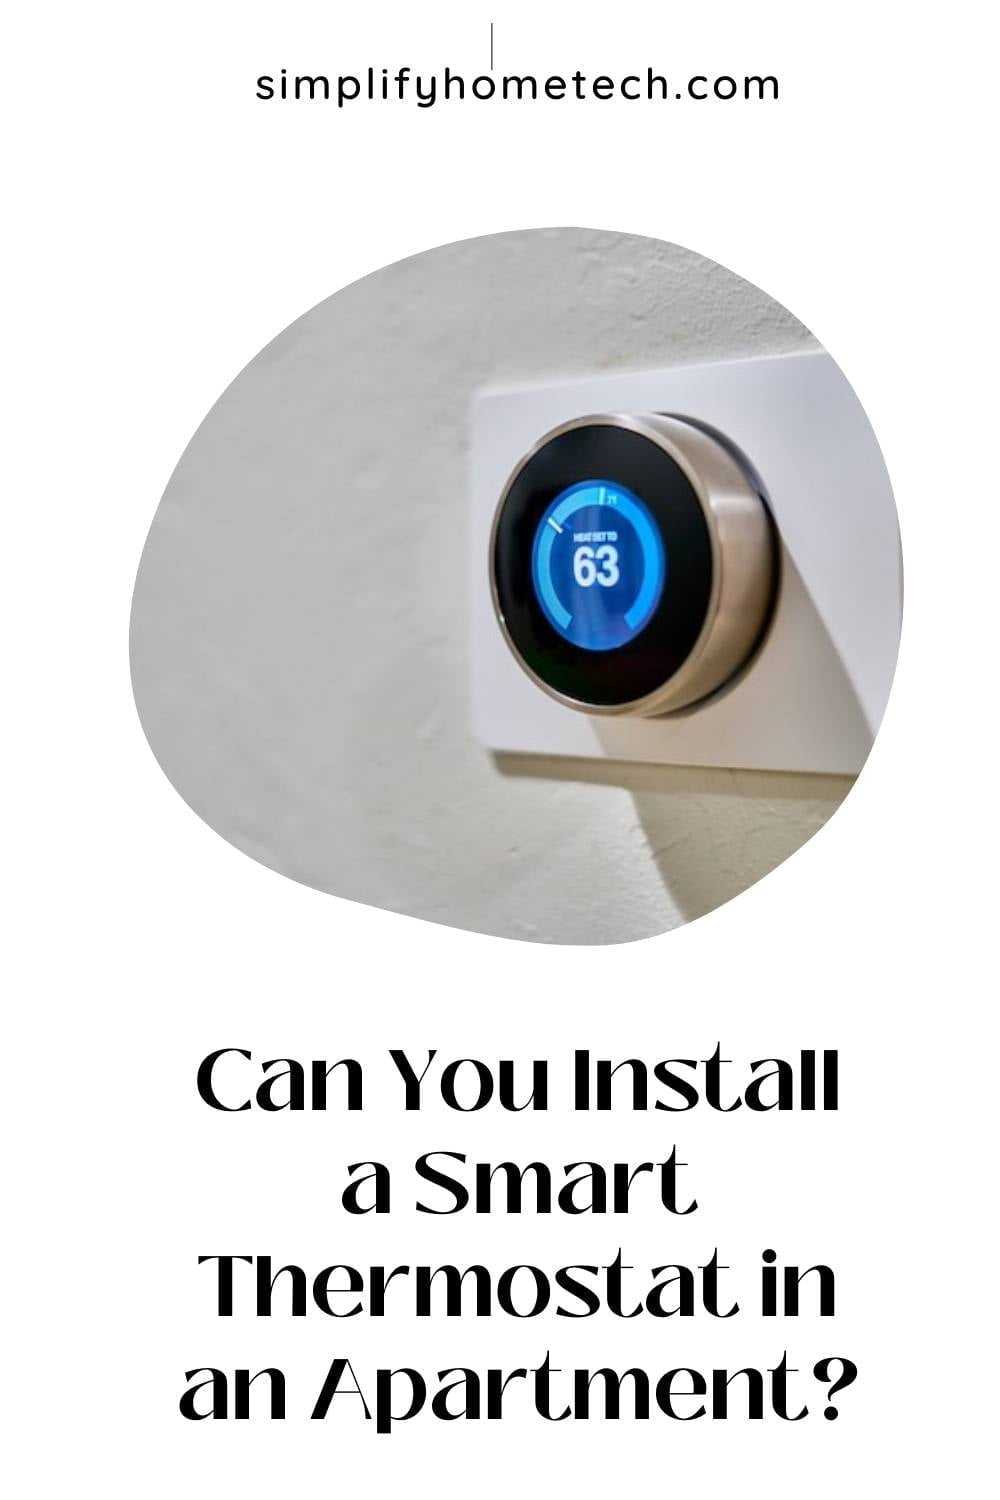 Can You Install a Smart Thermostat in an Apartment?